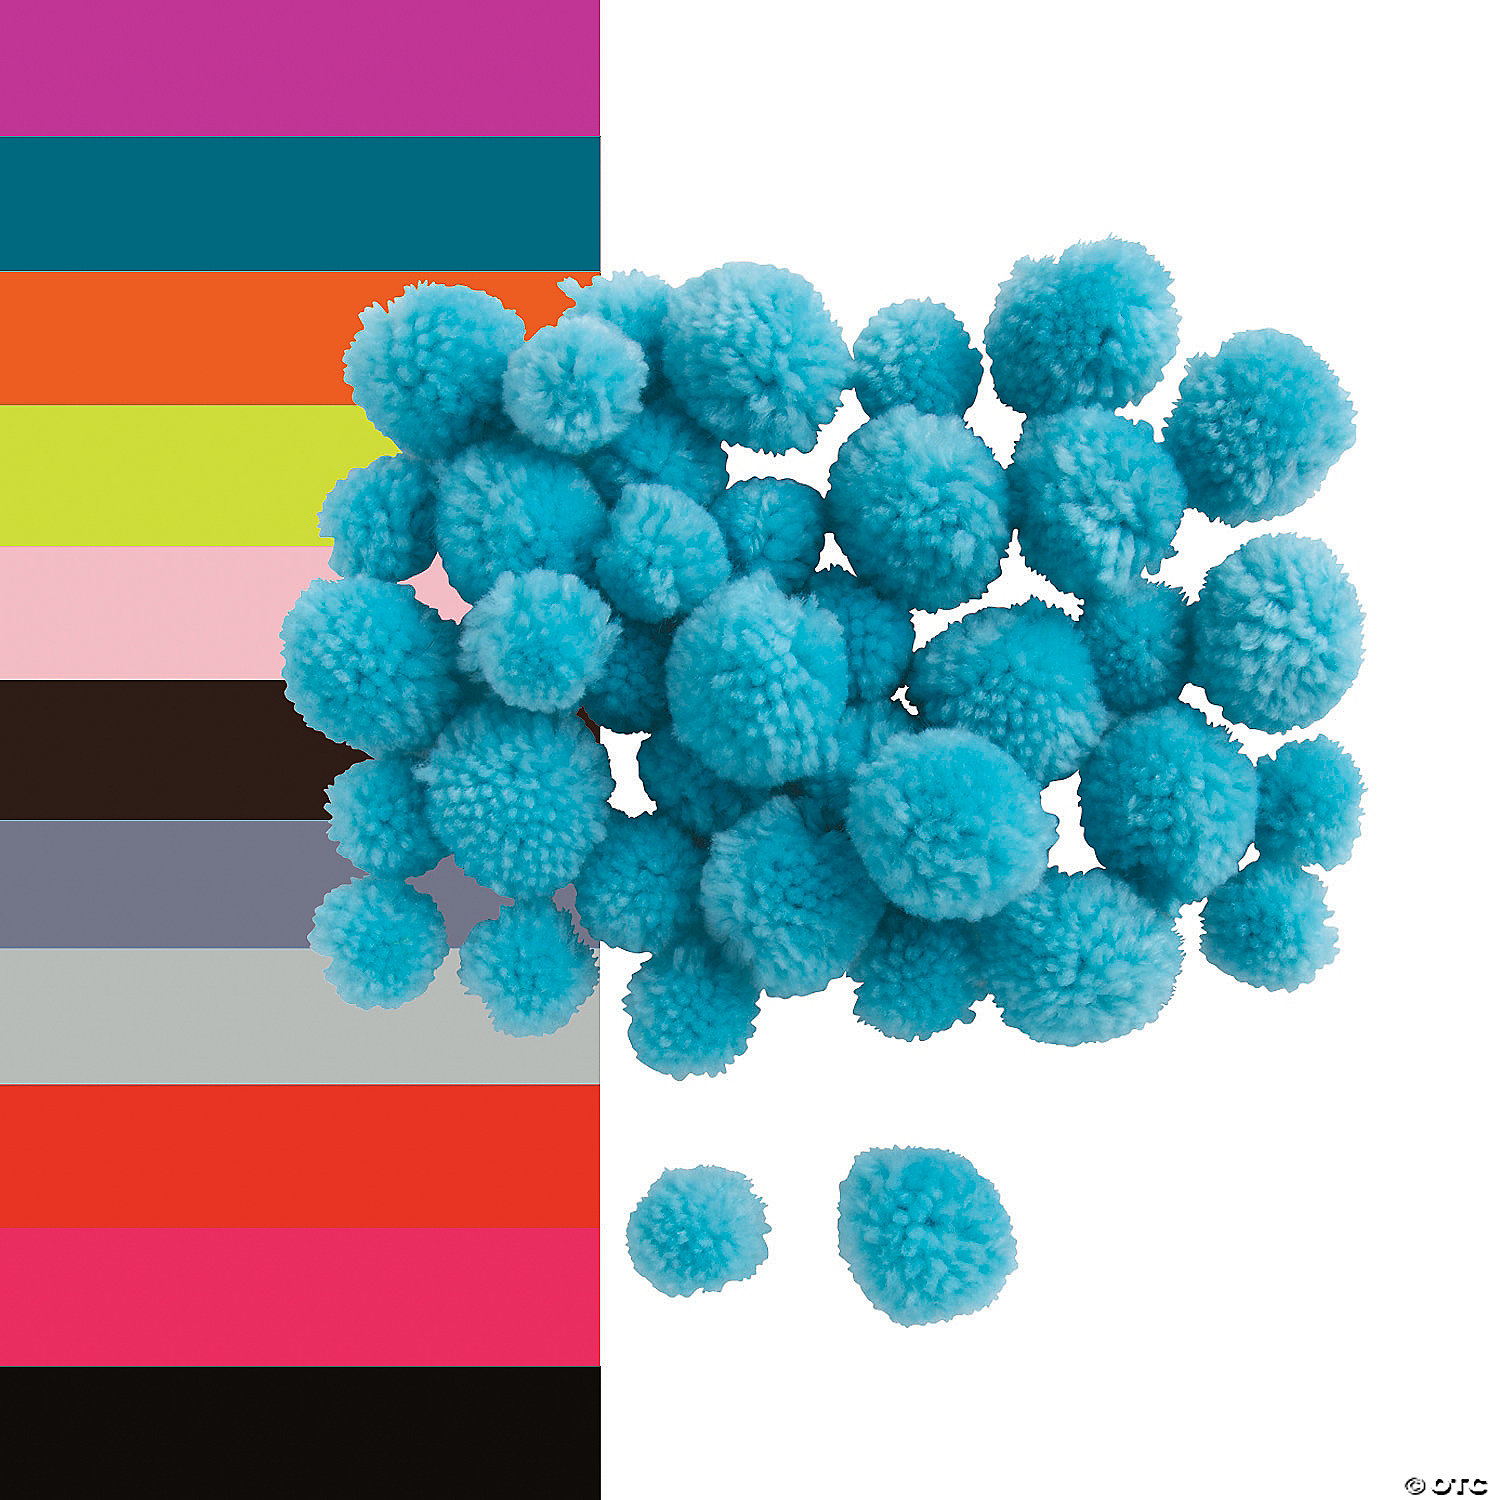 30-pack Rainbow Pom Poms includes jumbo 2 inch and other varies size 